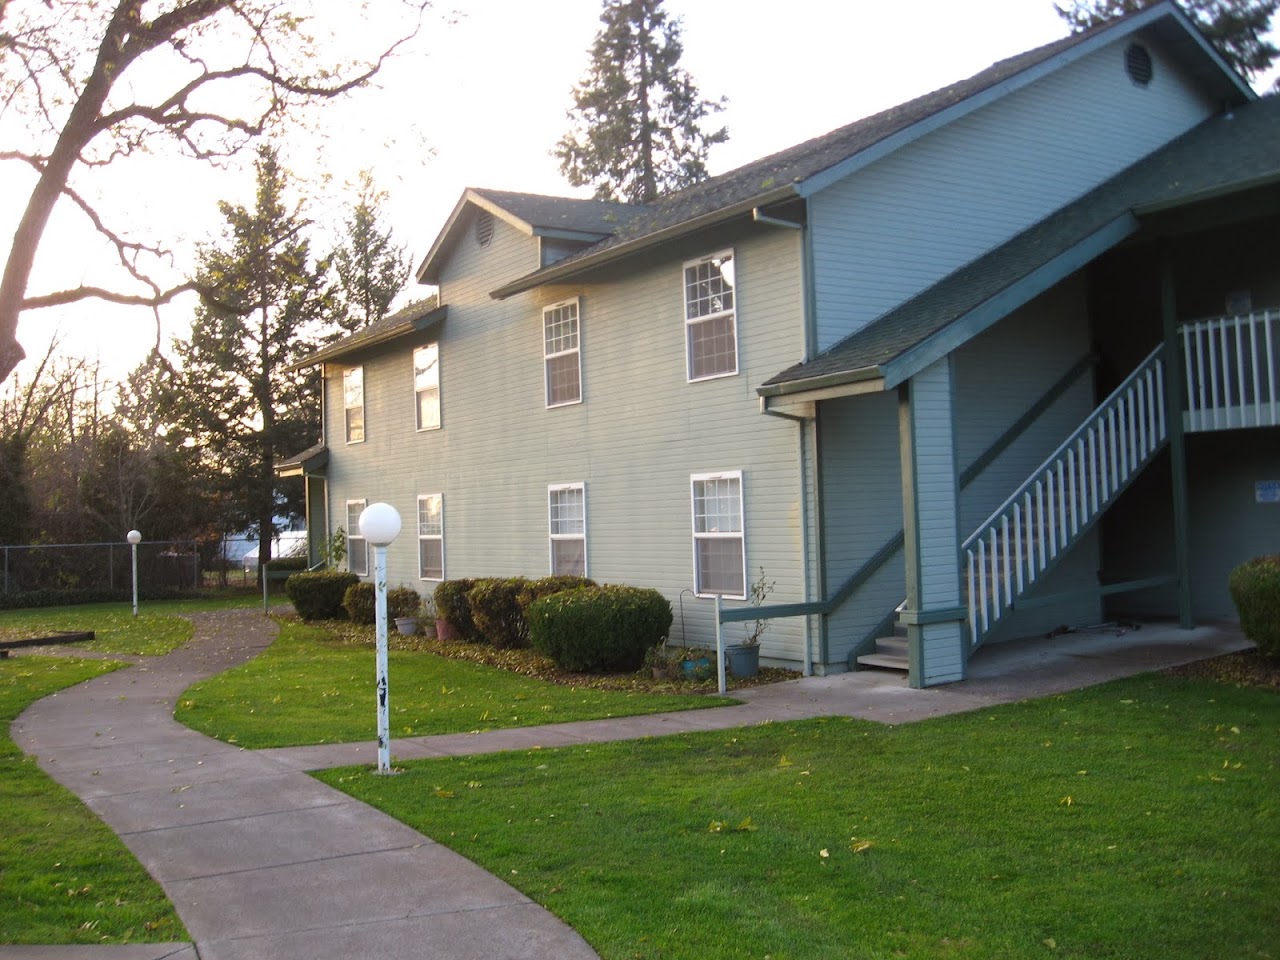 Photo of BUTTE CREEK APTS. Affordable housing located at 115 ONYX ST EAGLE POINT, OR 97524